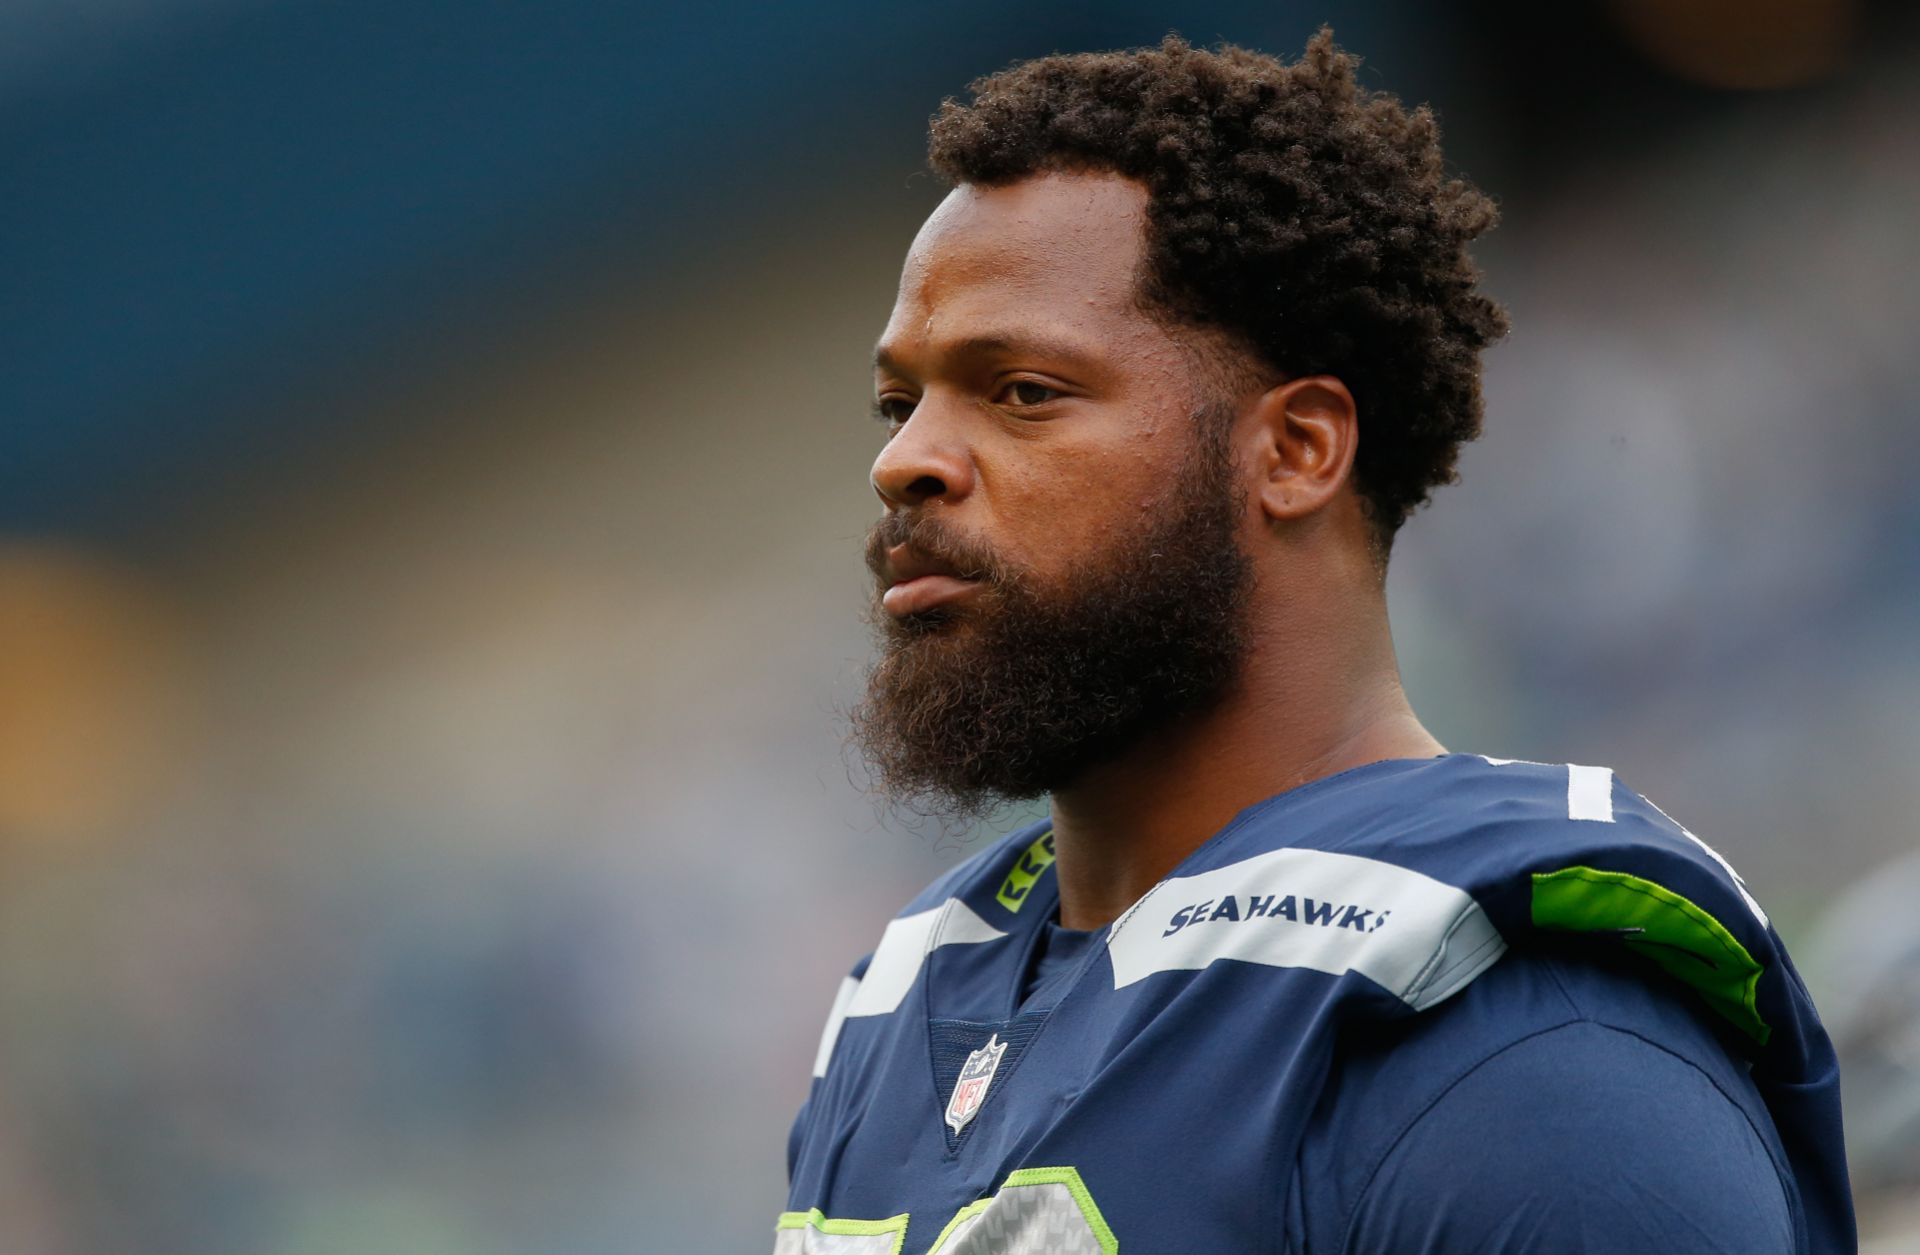 Defensive end Michael Bennett of the Seattle Seahawks looks on prior to the game against the Minnesota Vikings on Aug. 18, 2017, in Seattle, Washington.